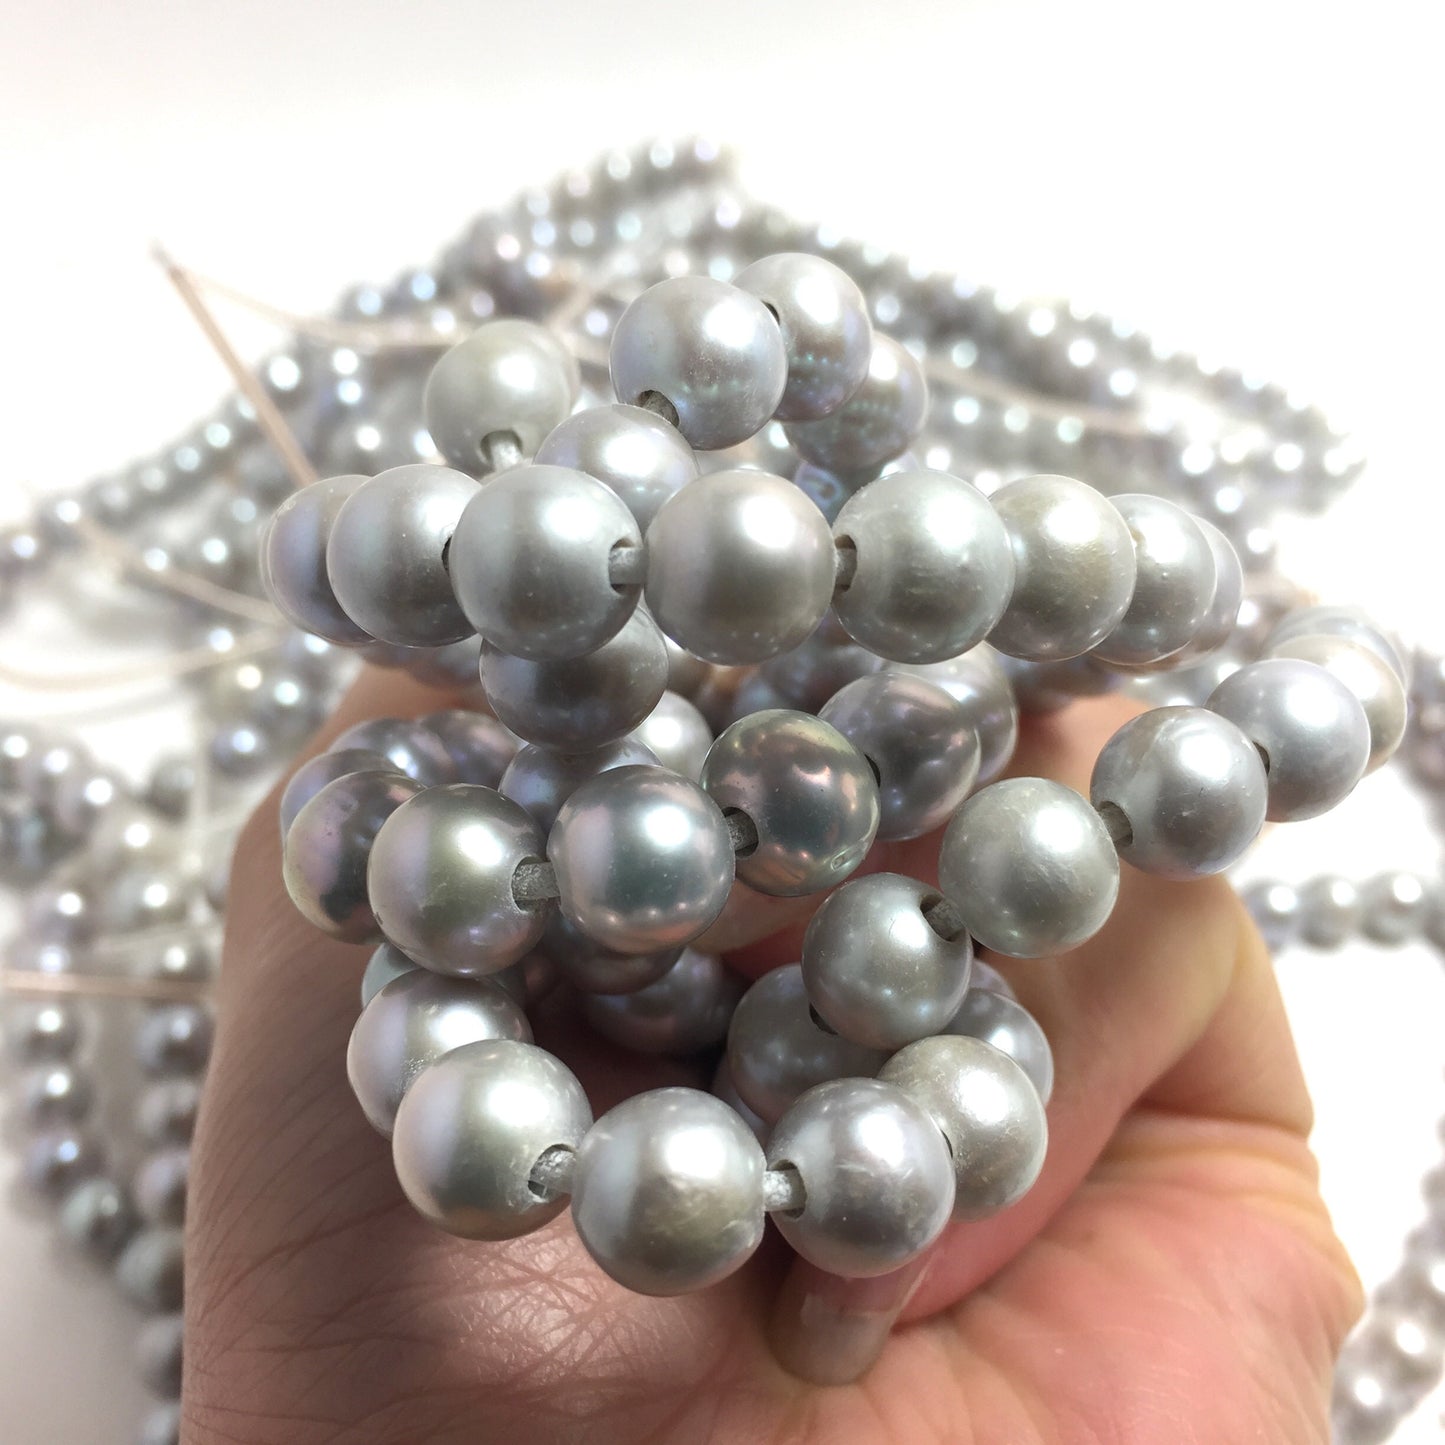 Large Hole Pearls 8.5-9mm Grey Round Freshwater Pearls, 8 inch with 2.5mm Hole, LHRD006